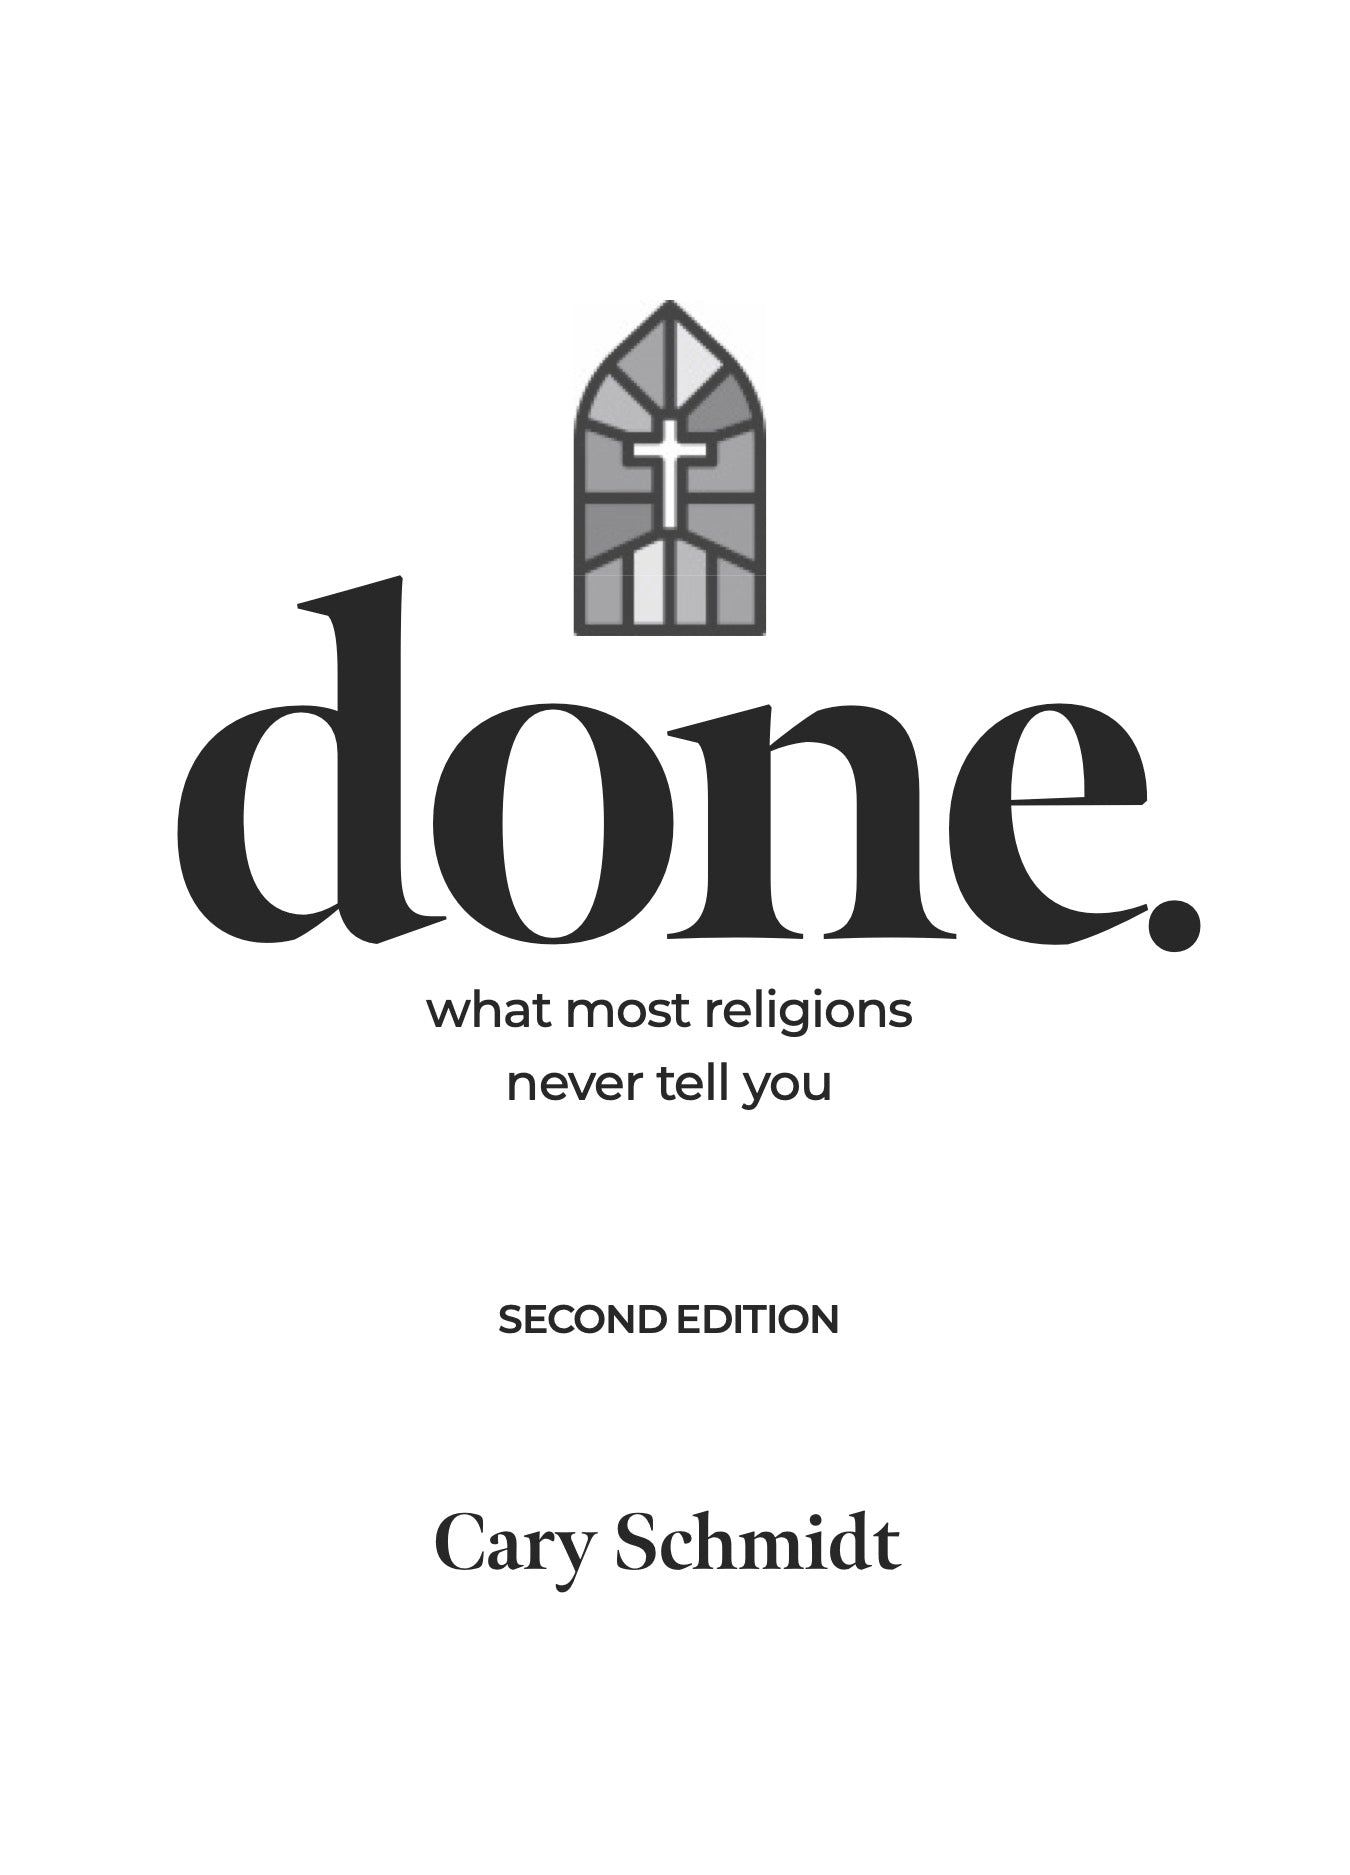 Done, Second Edition: What most religions never tell you